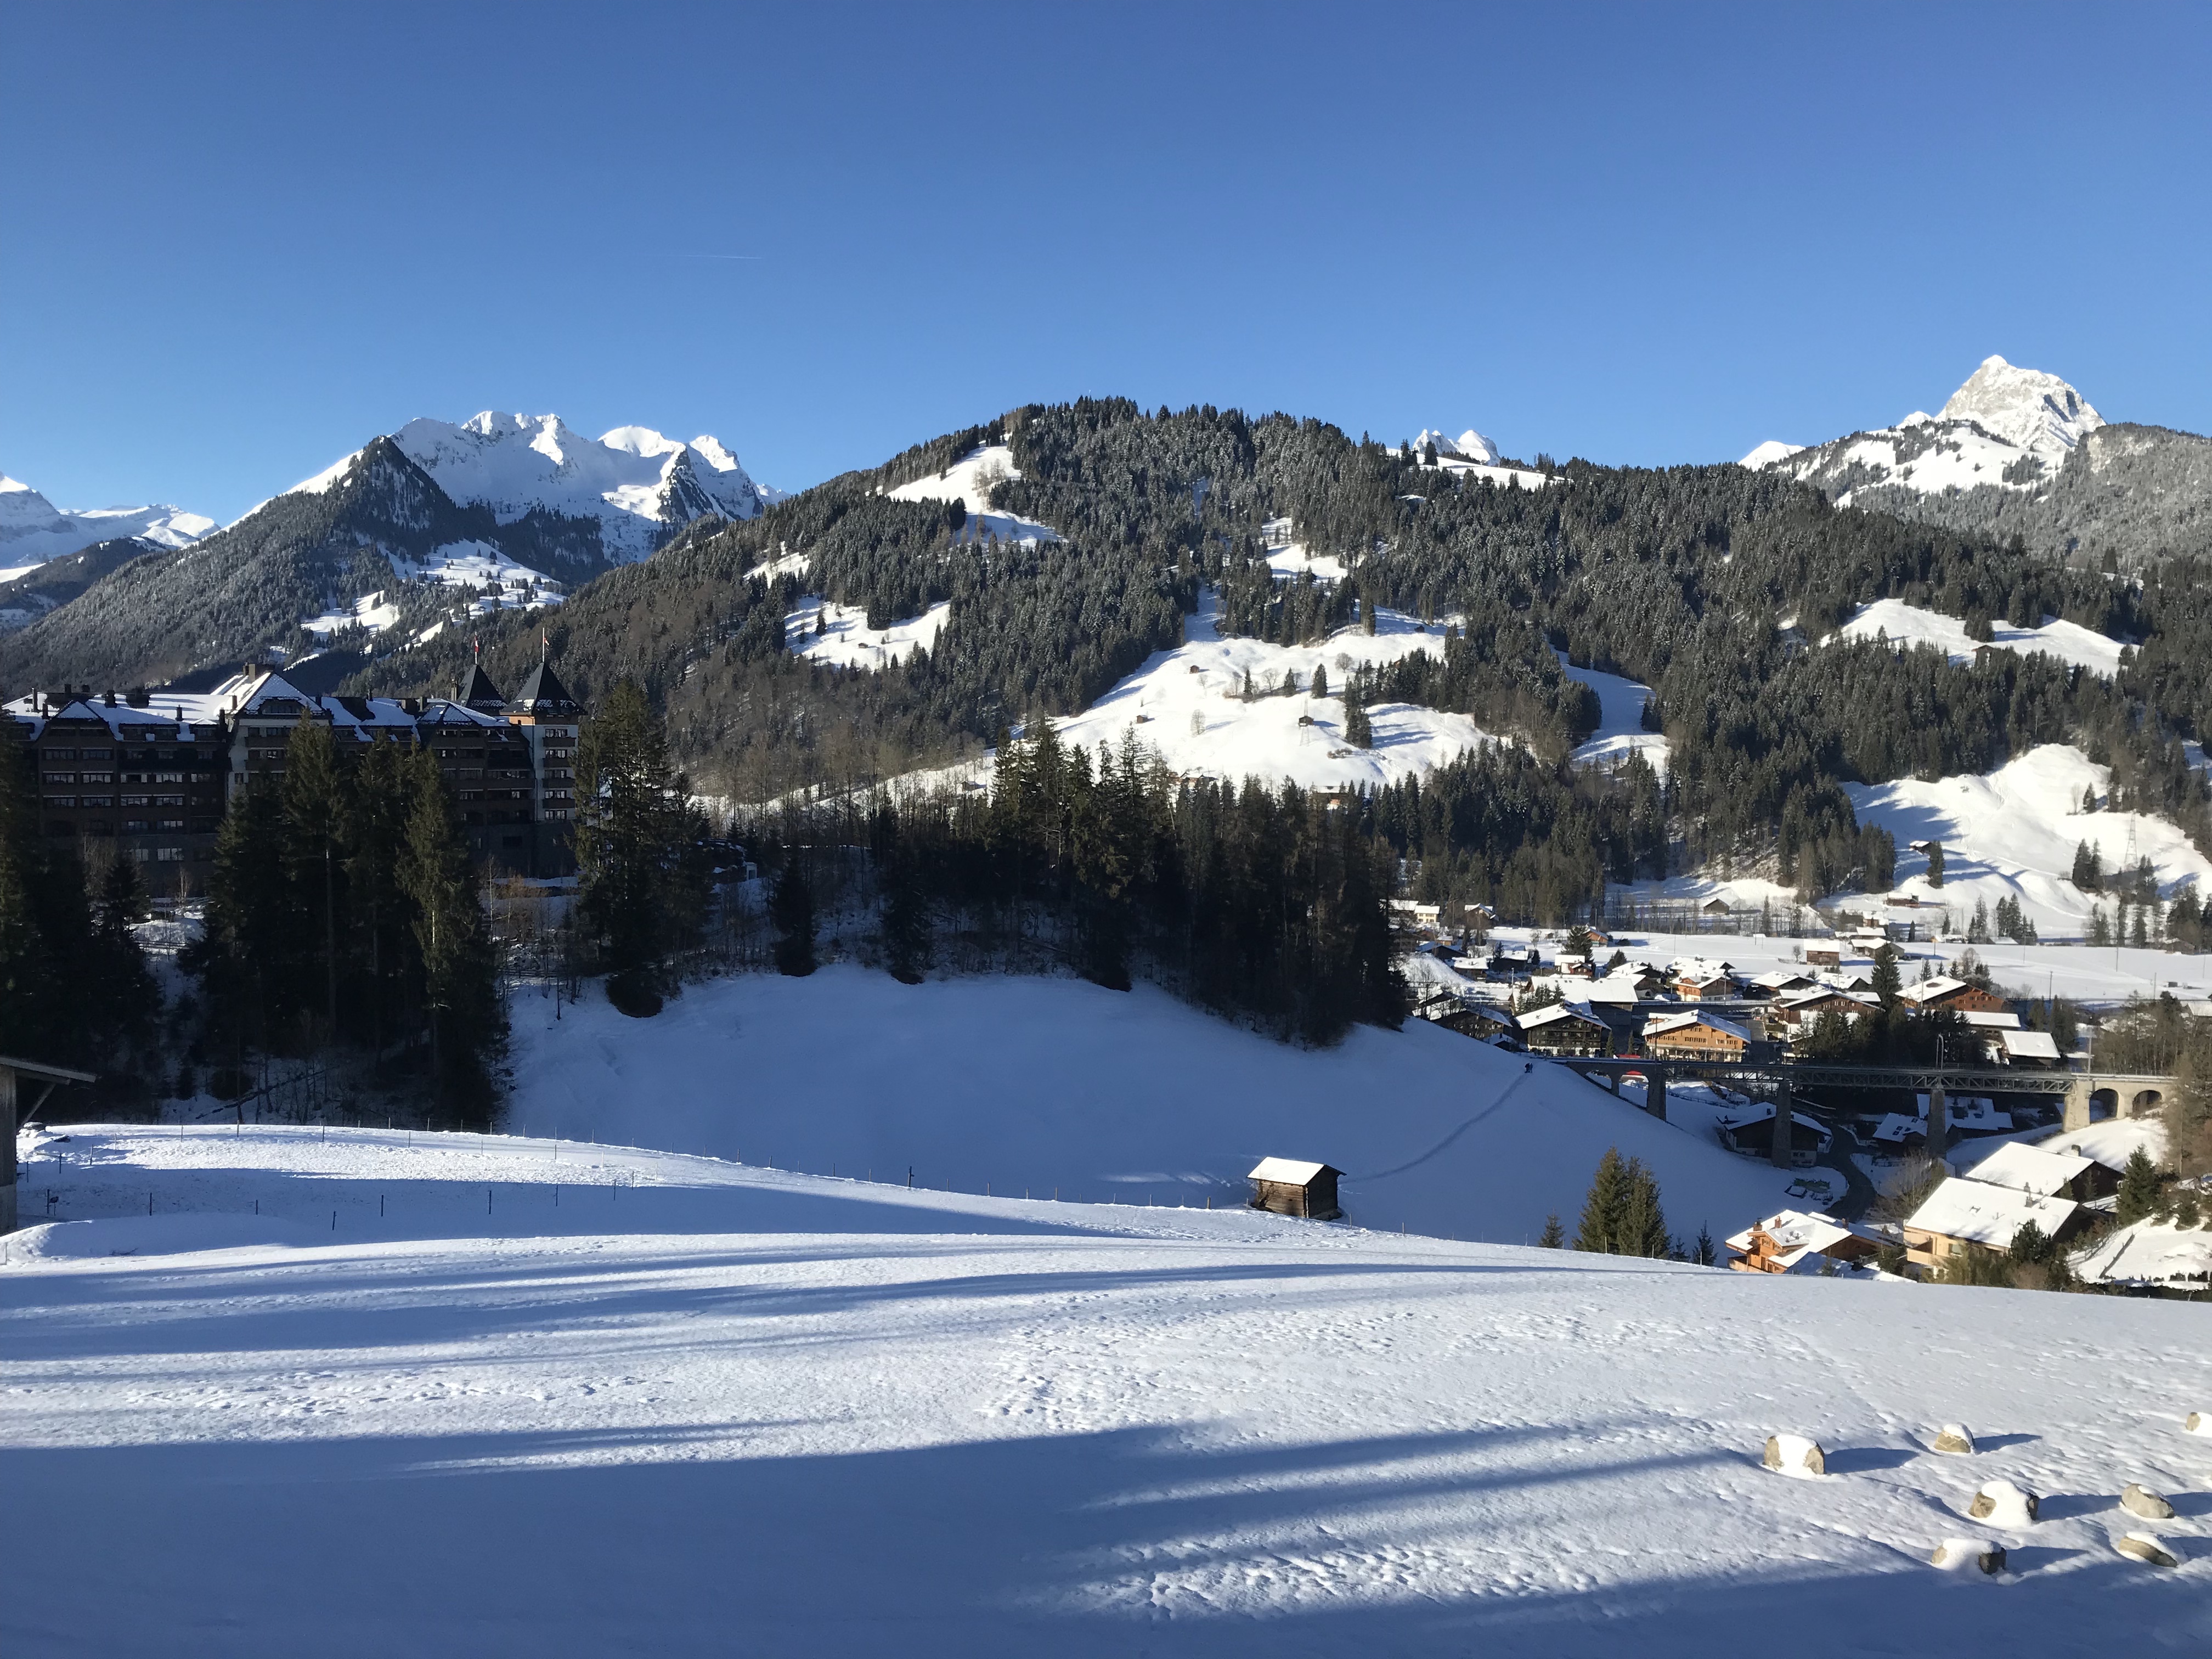 It is a short trip from your London home to your Gstaad escape...